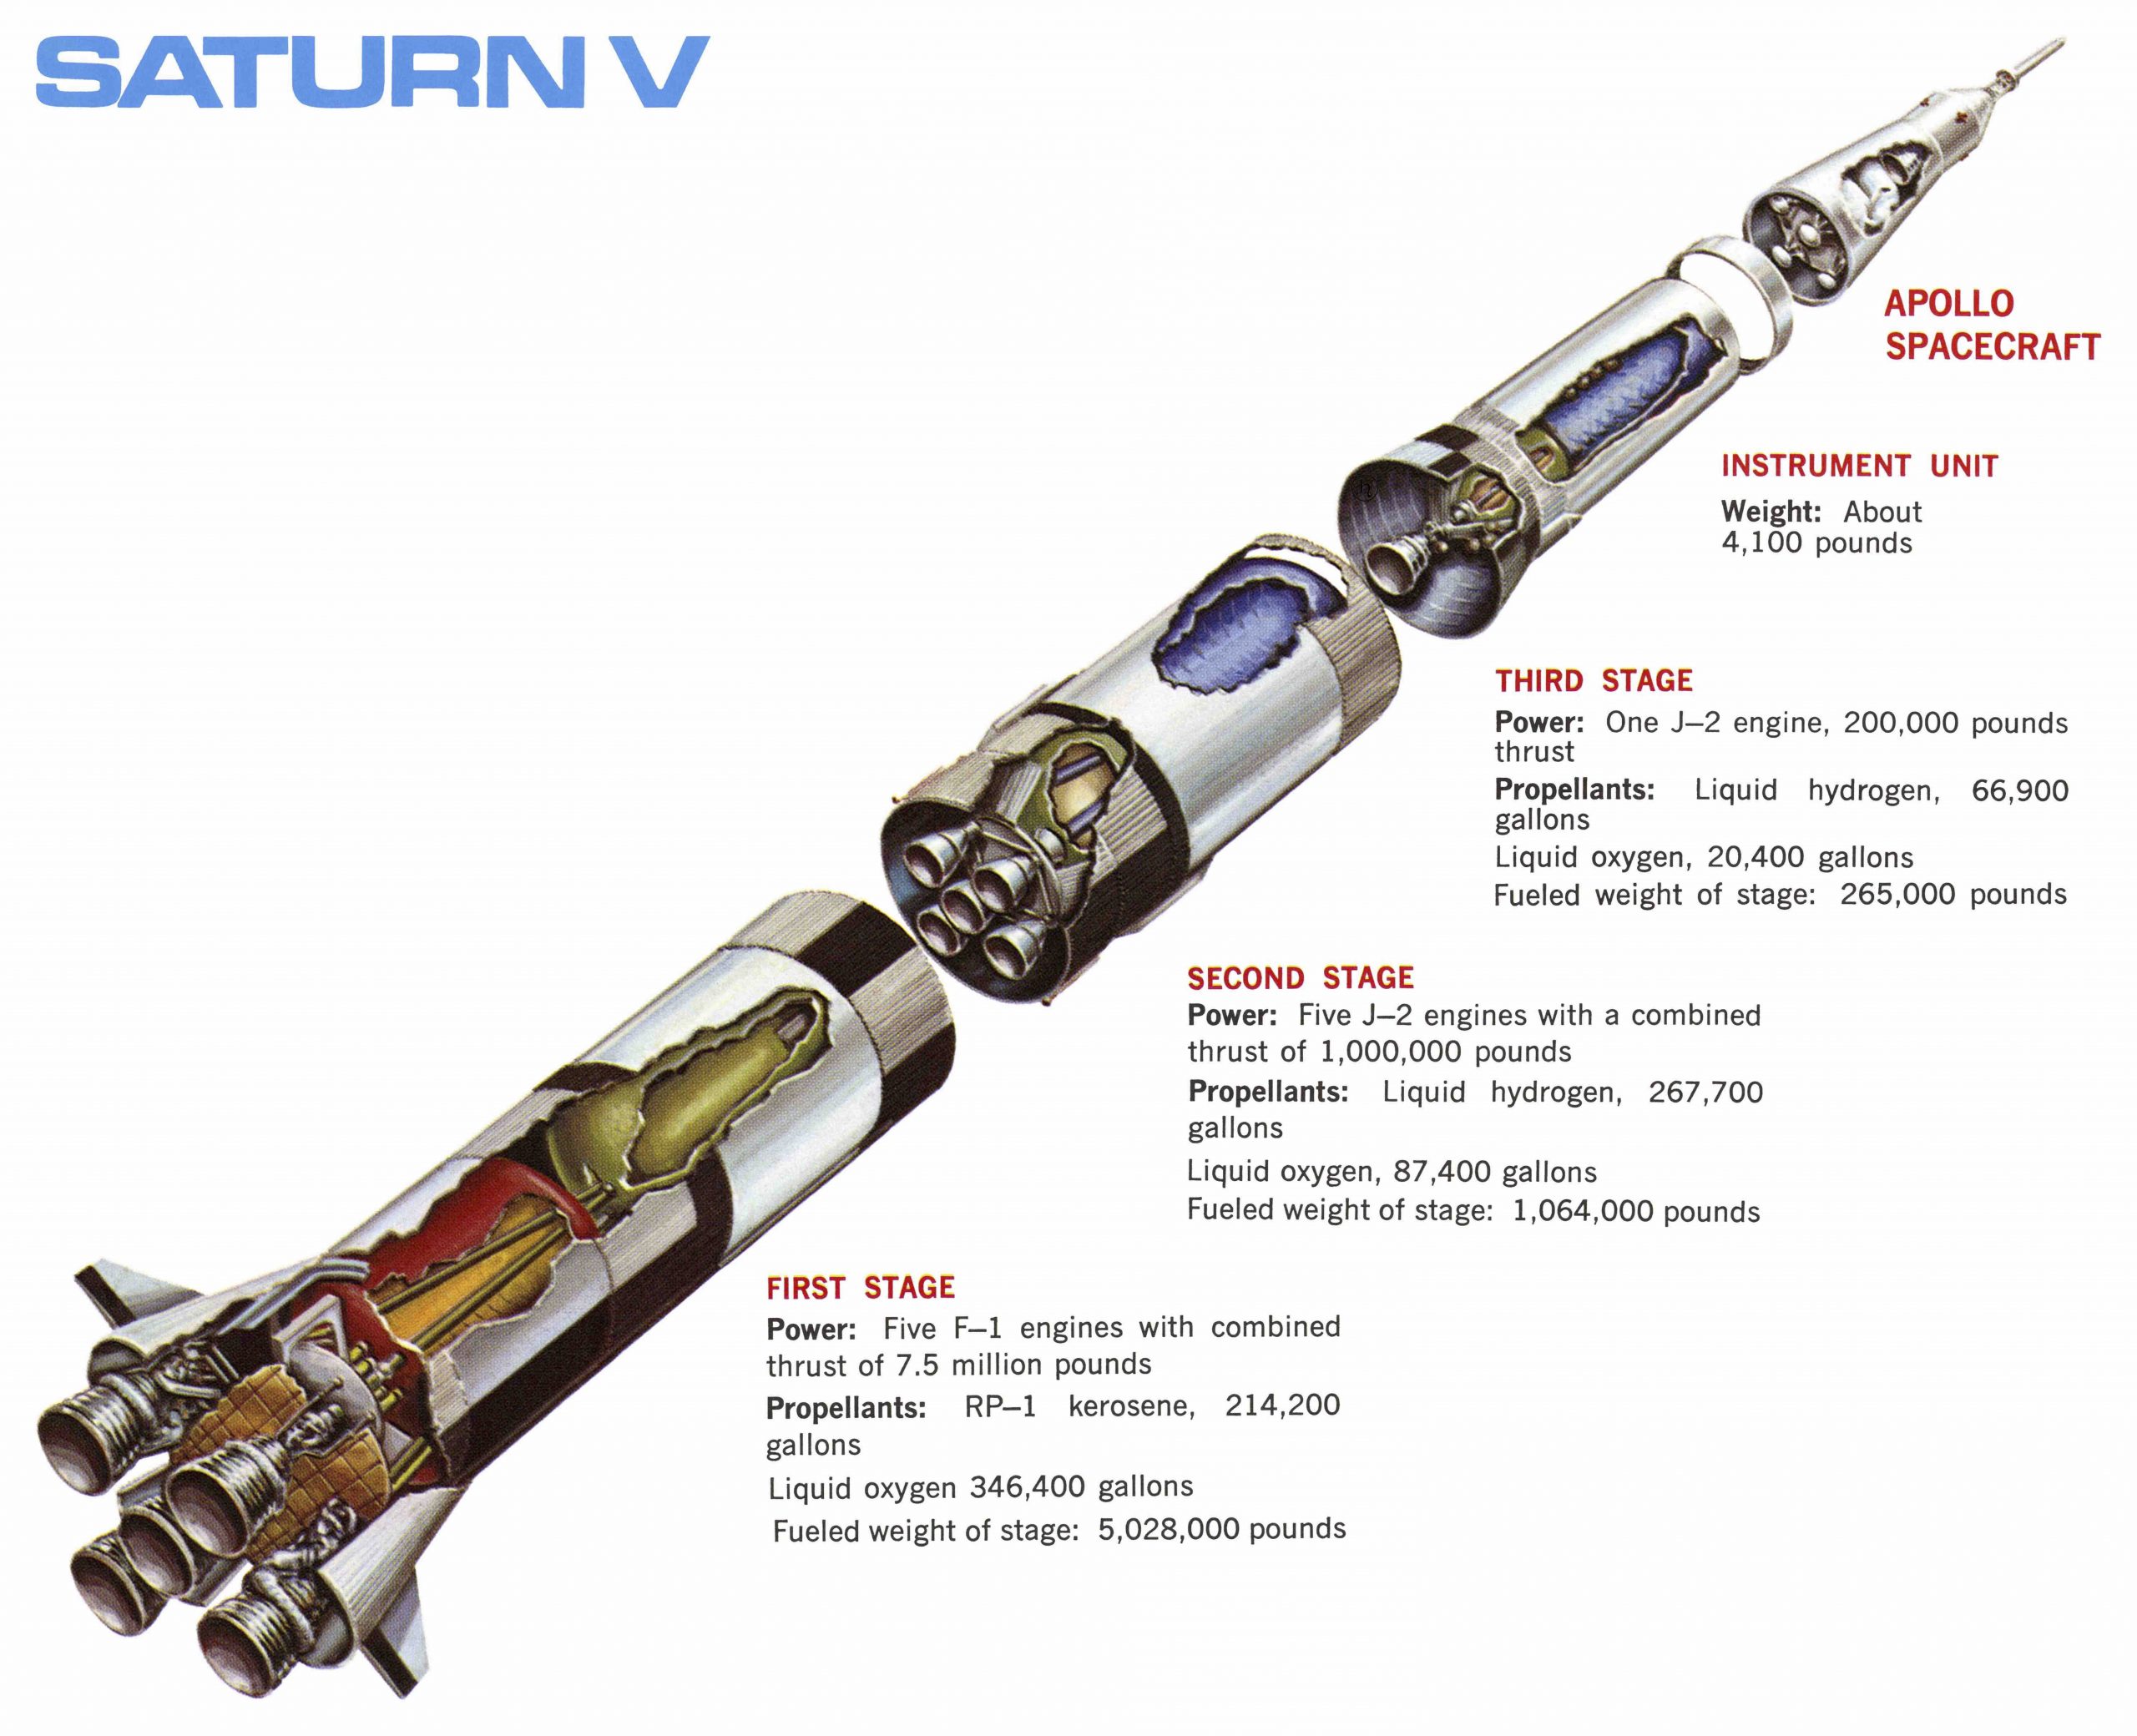 A diagram of the Saturn V rocket showing the different stages of the craft.